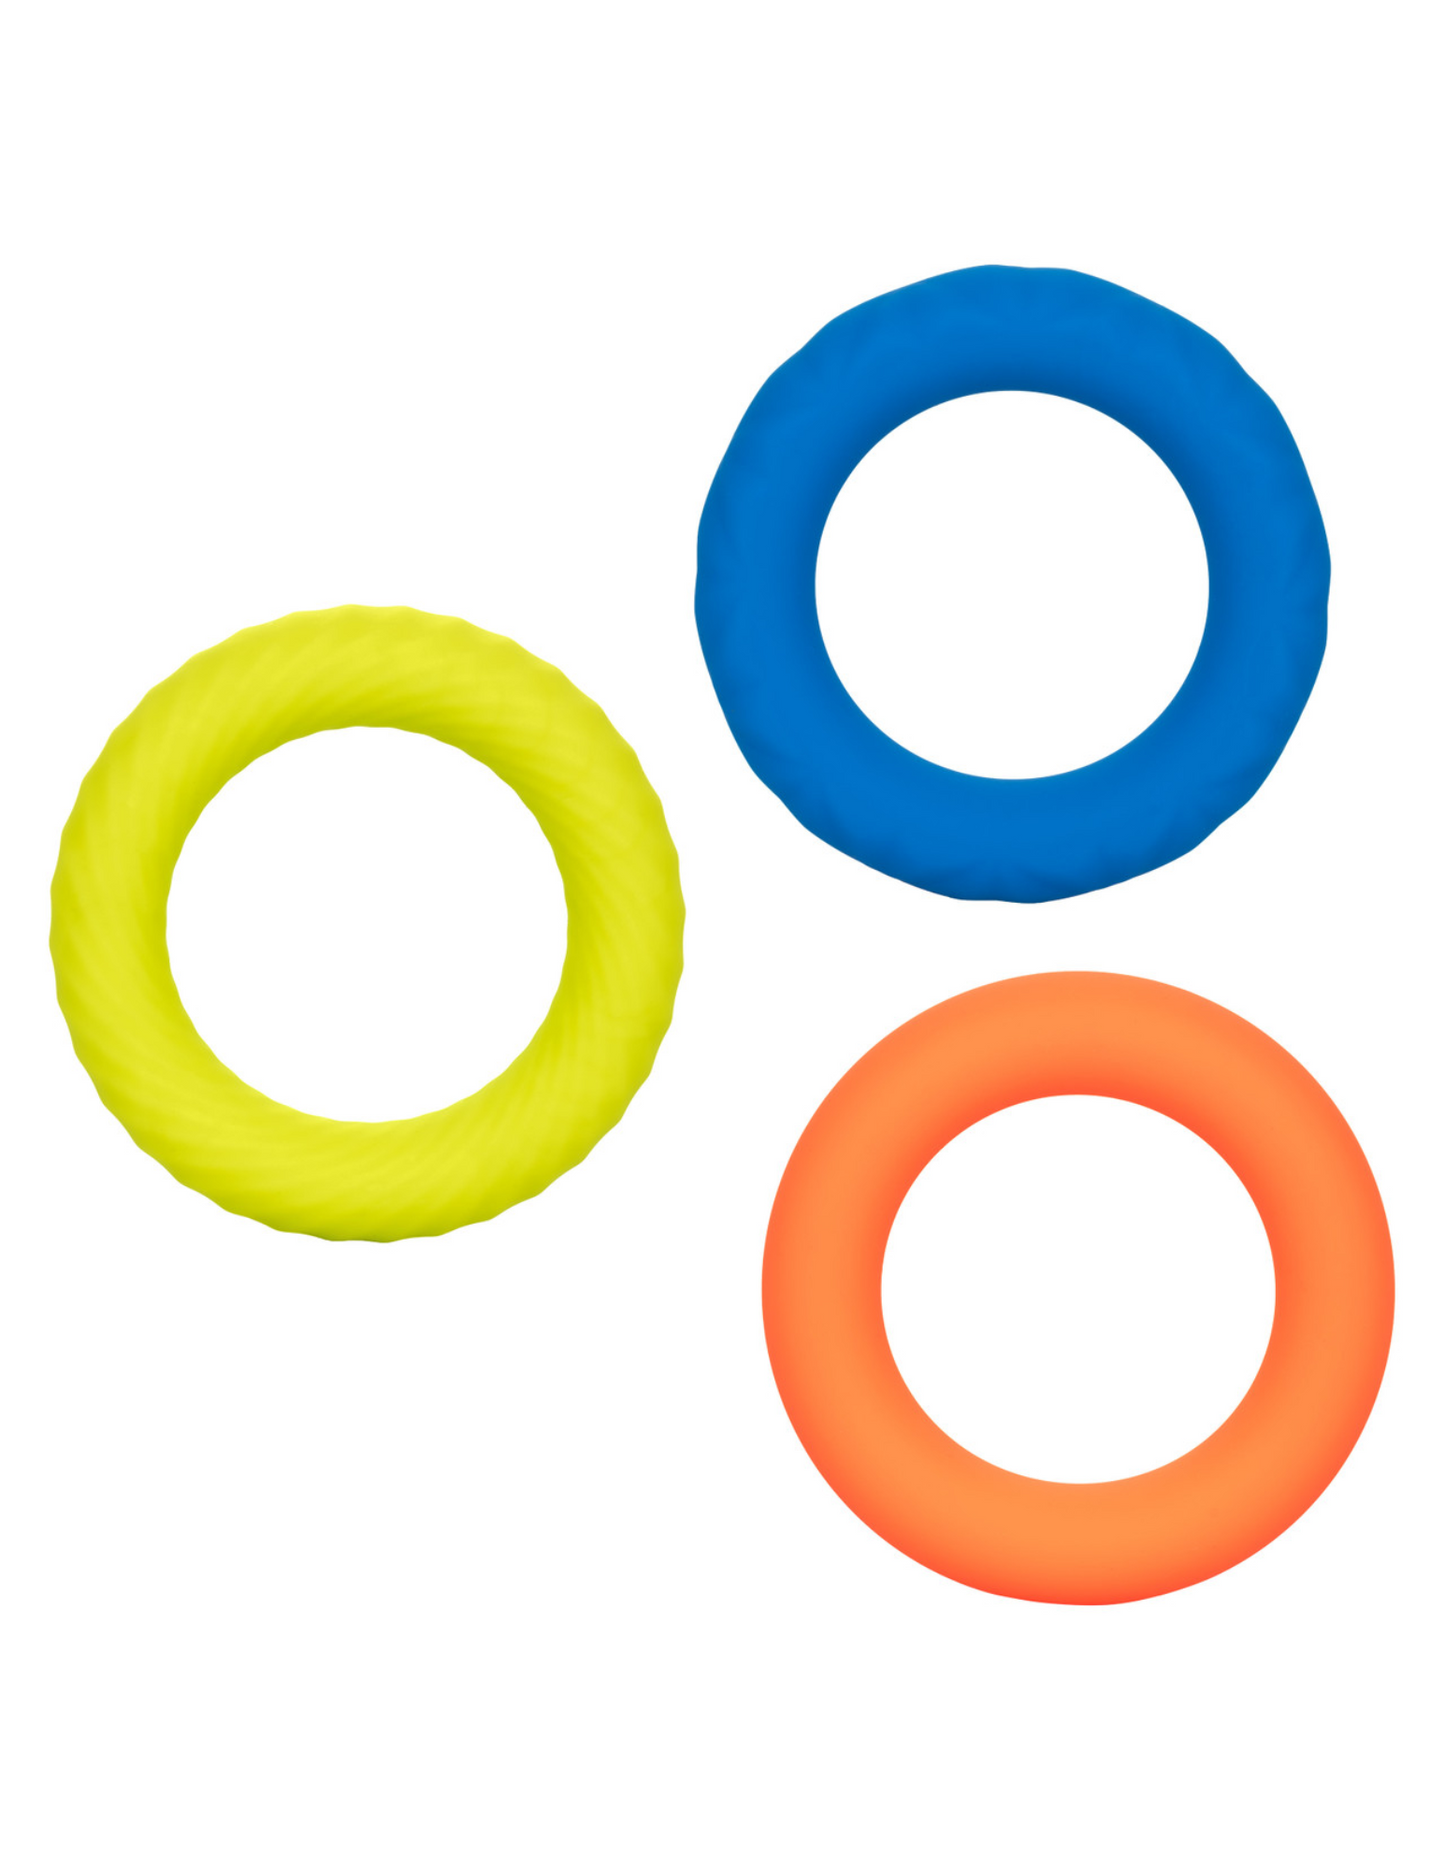 Full view of the 3 different cock rings that come with the Link Up Ultra Soft Cock Ring Set (3pk), from CalExotics (orange, blue, green).